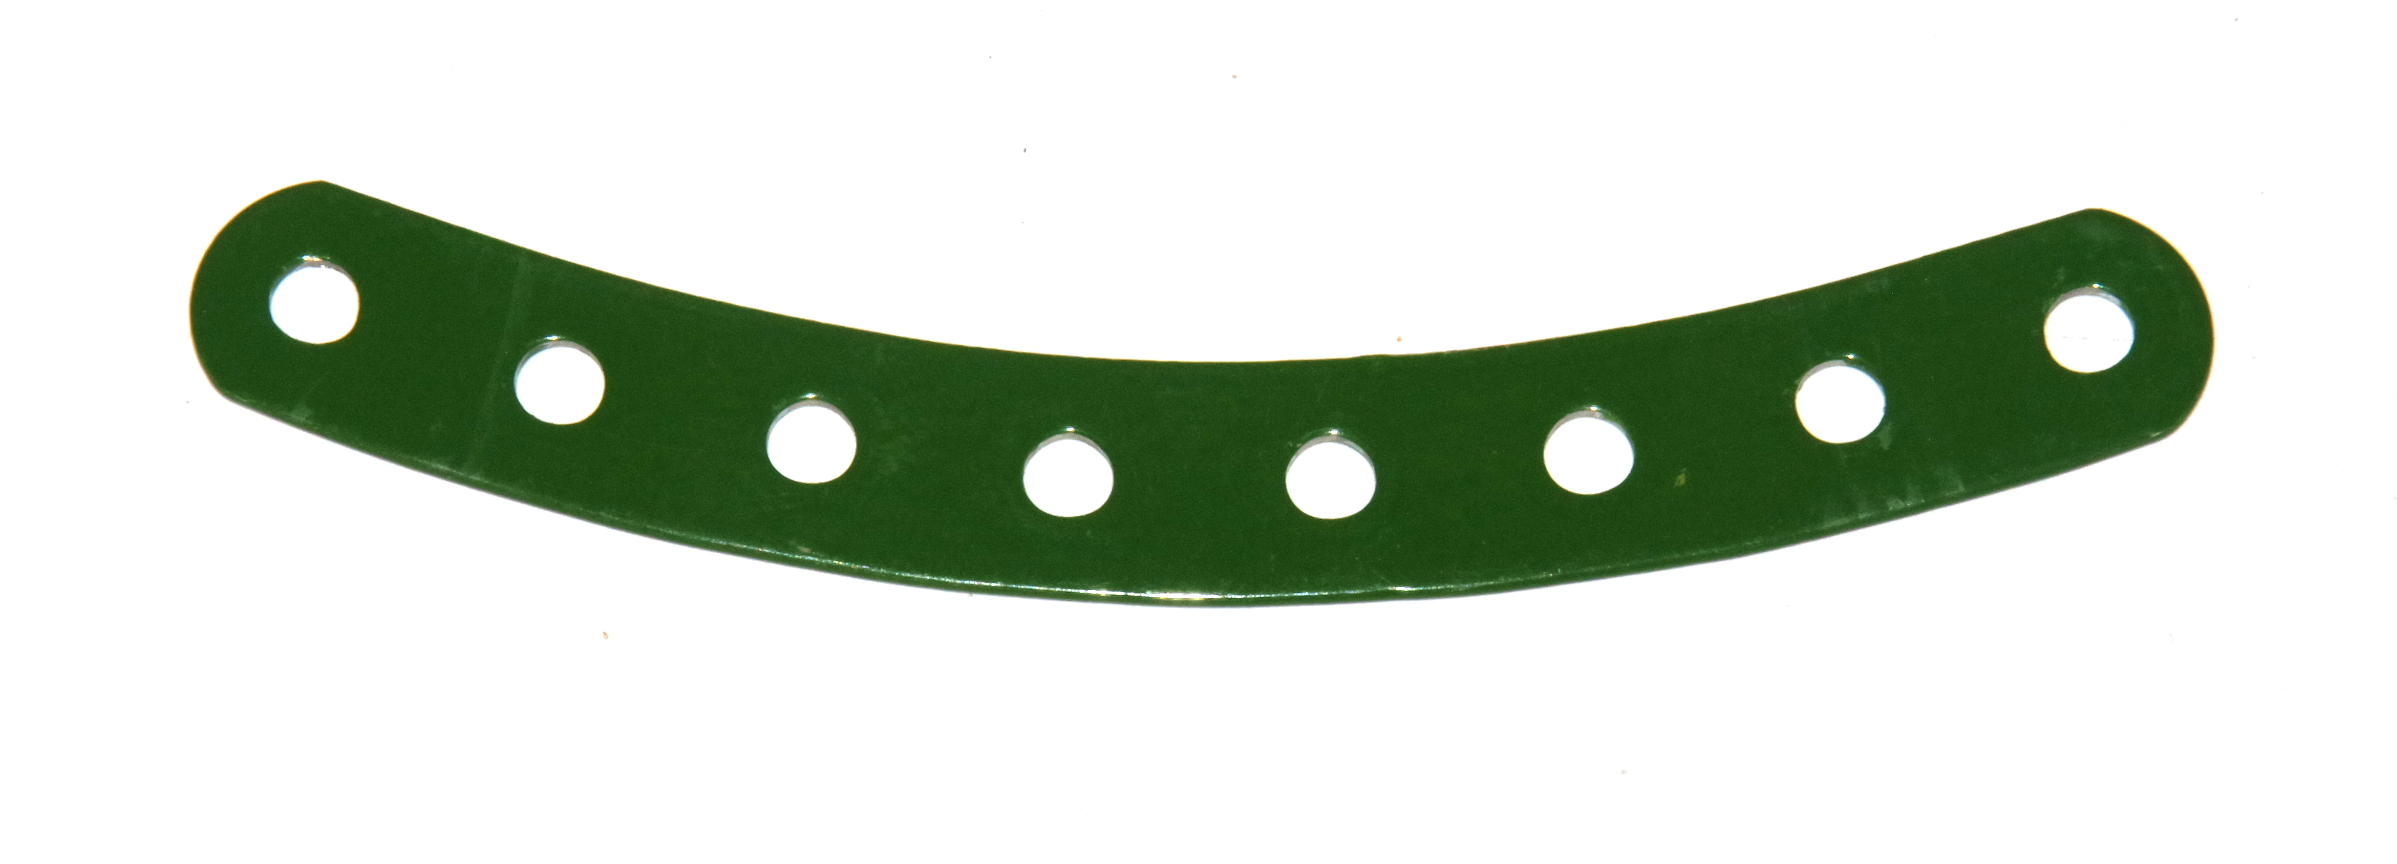 89bx Curved Strip 8 Hole Green